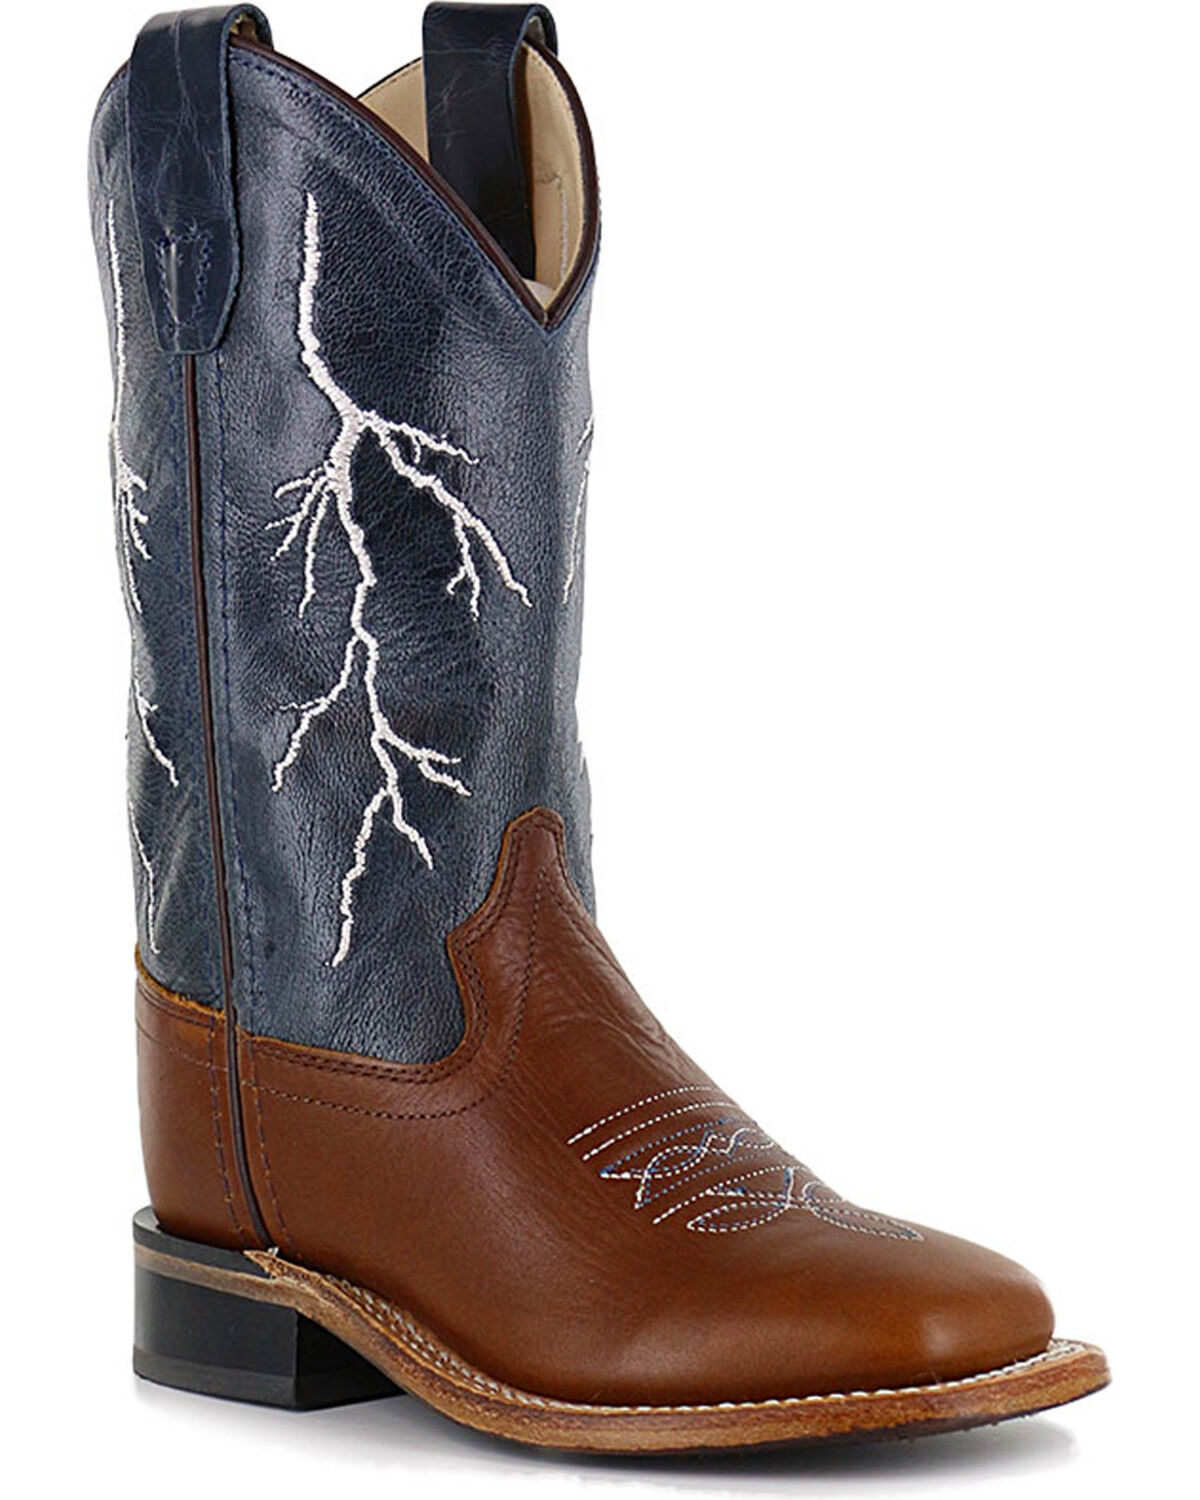 Kid's Leather Cowboy Boots Animal Print  SPECIAL PRICE $69.99 Style #741 